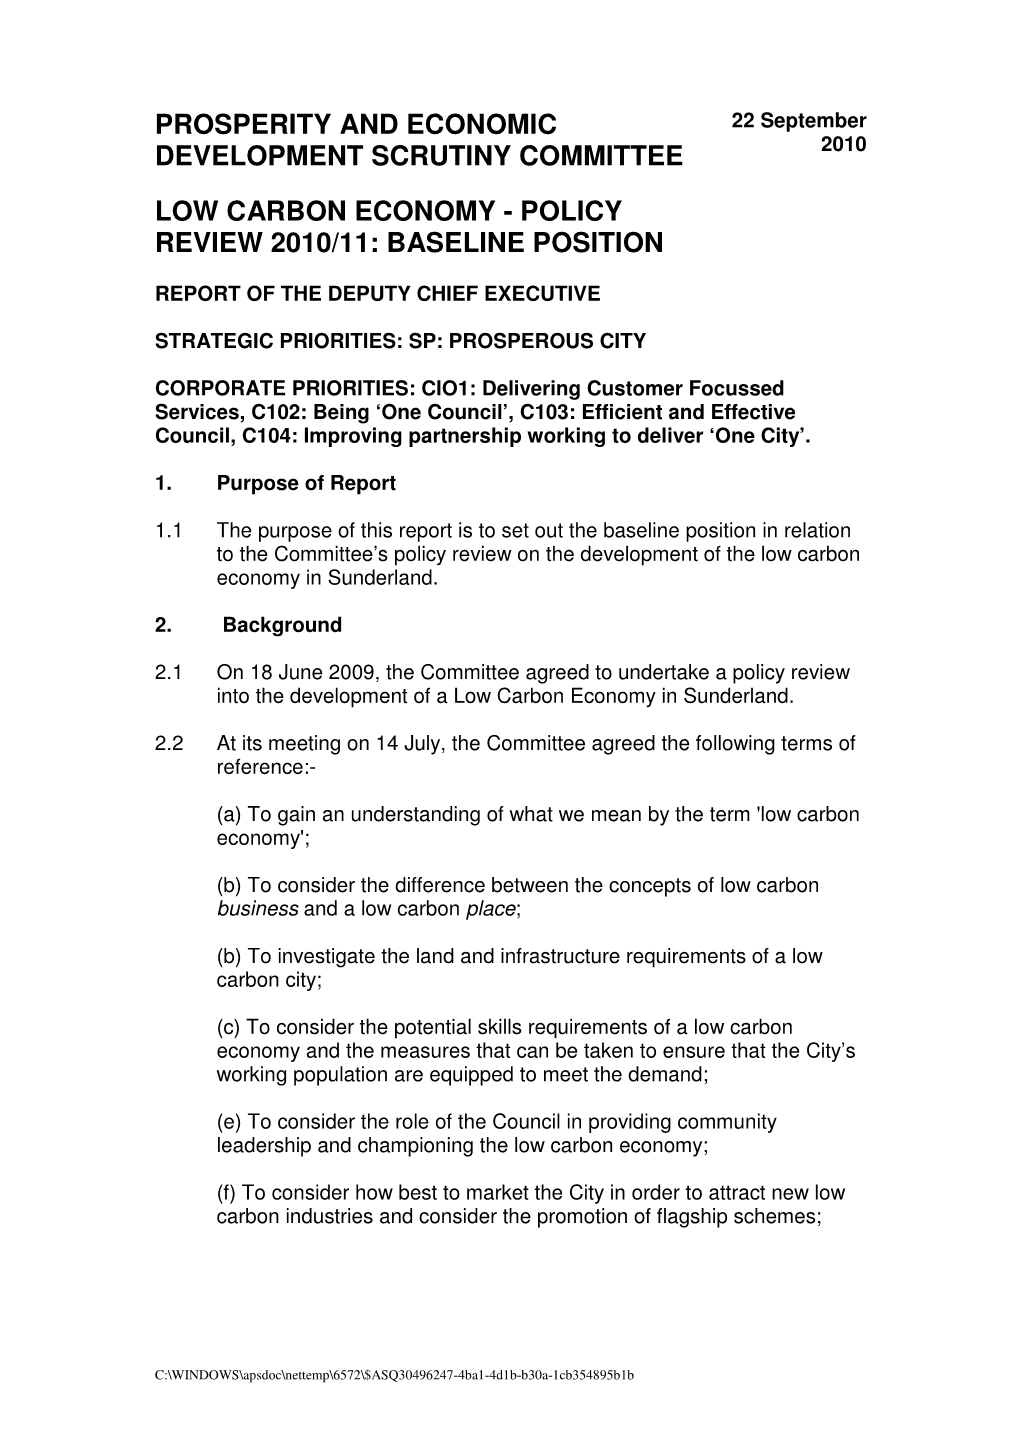 Low Carbon Economy - Policy Review 2010/11: Baseline Position